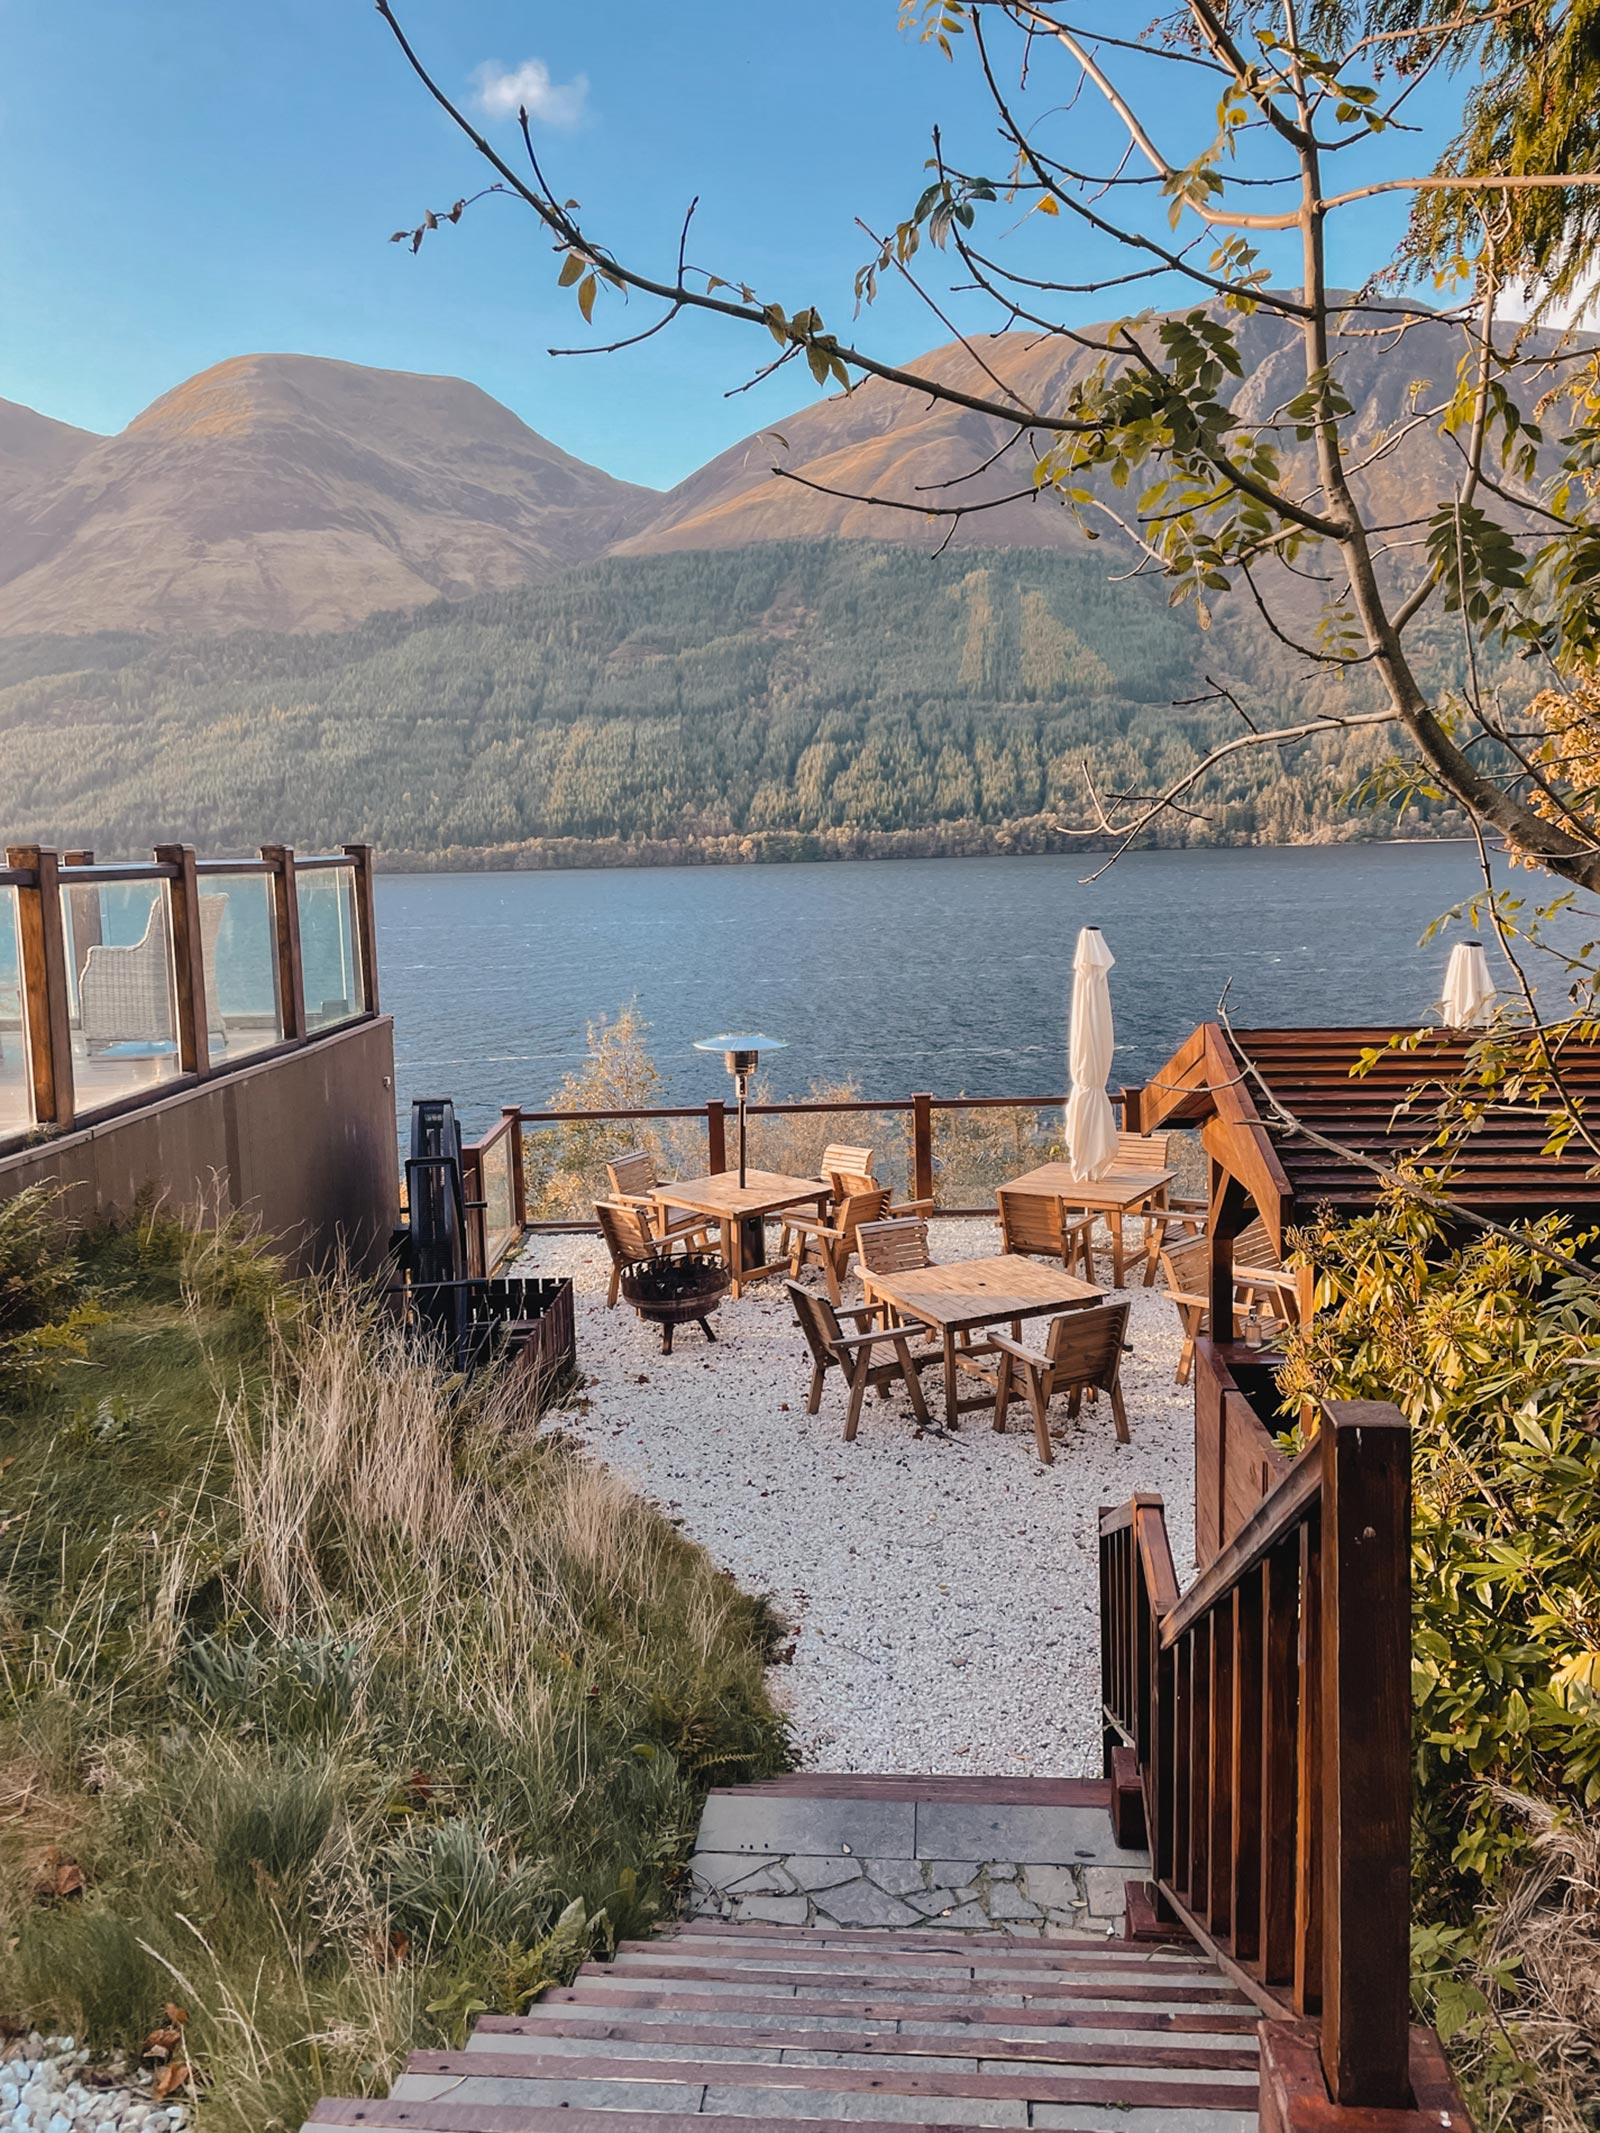 View of Loch Lochy from the The Lochview Bar and Grill